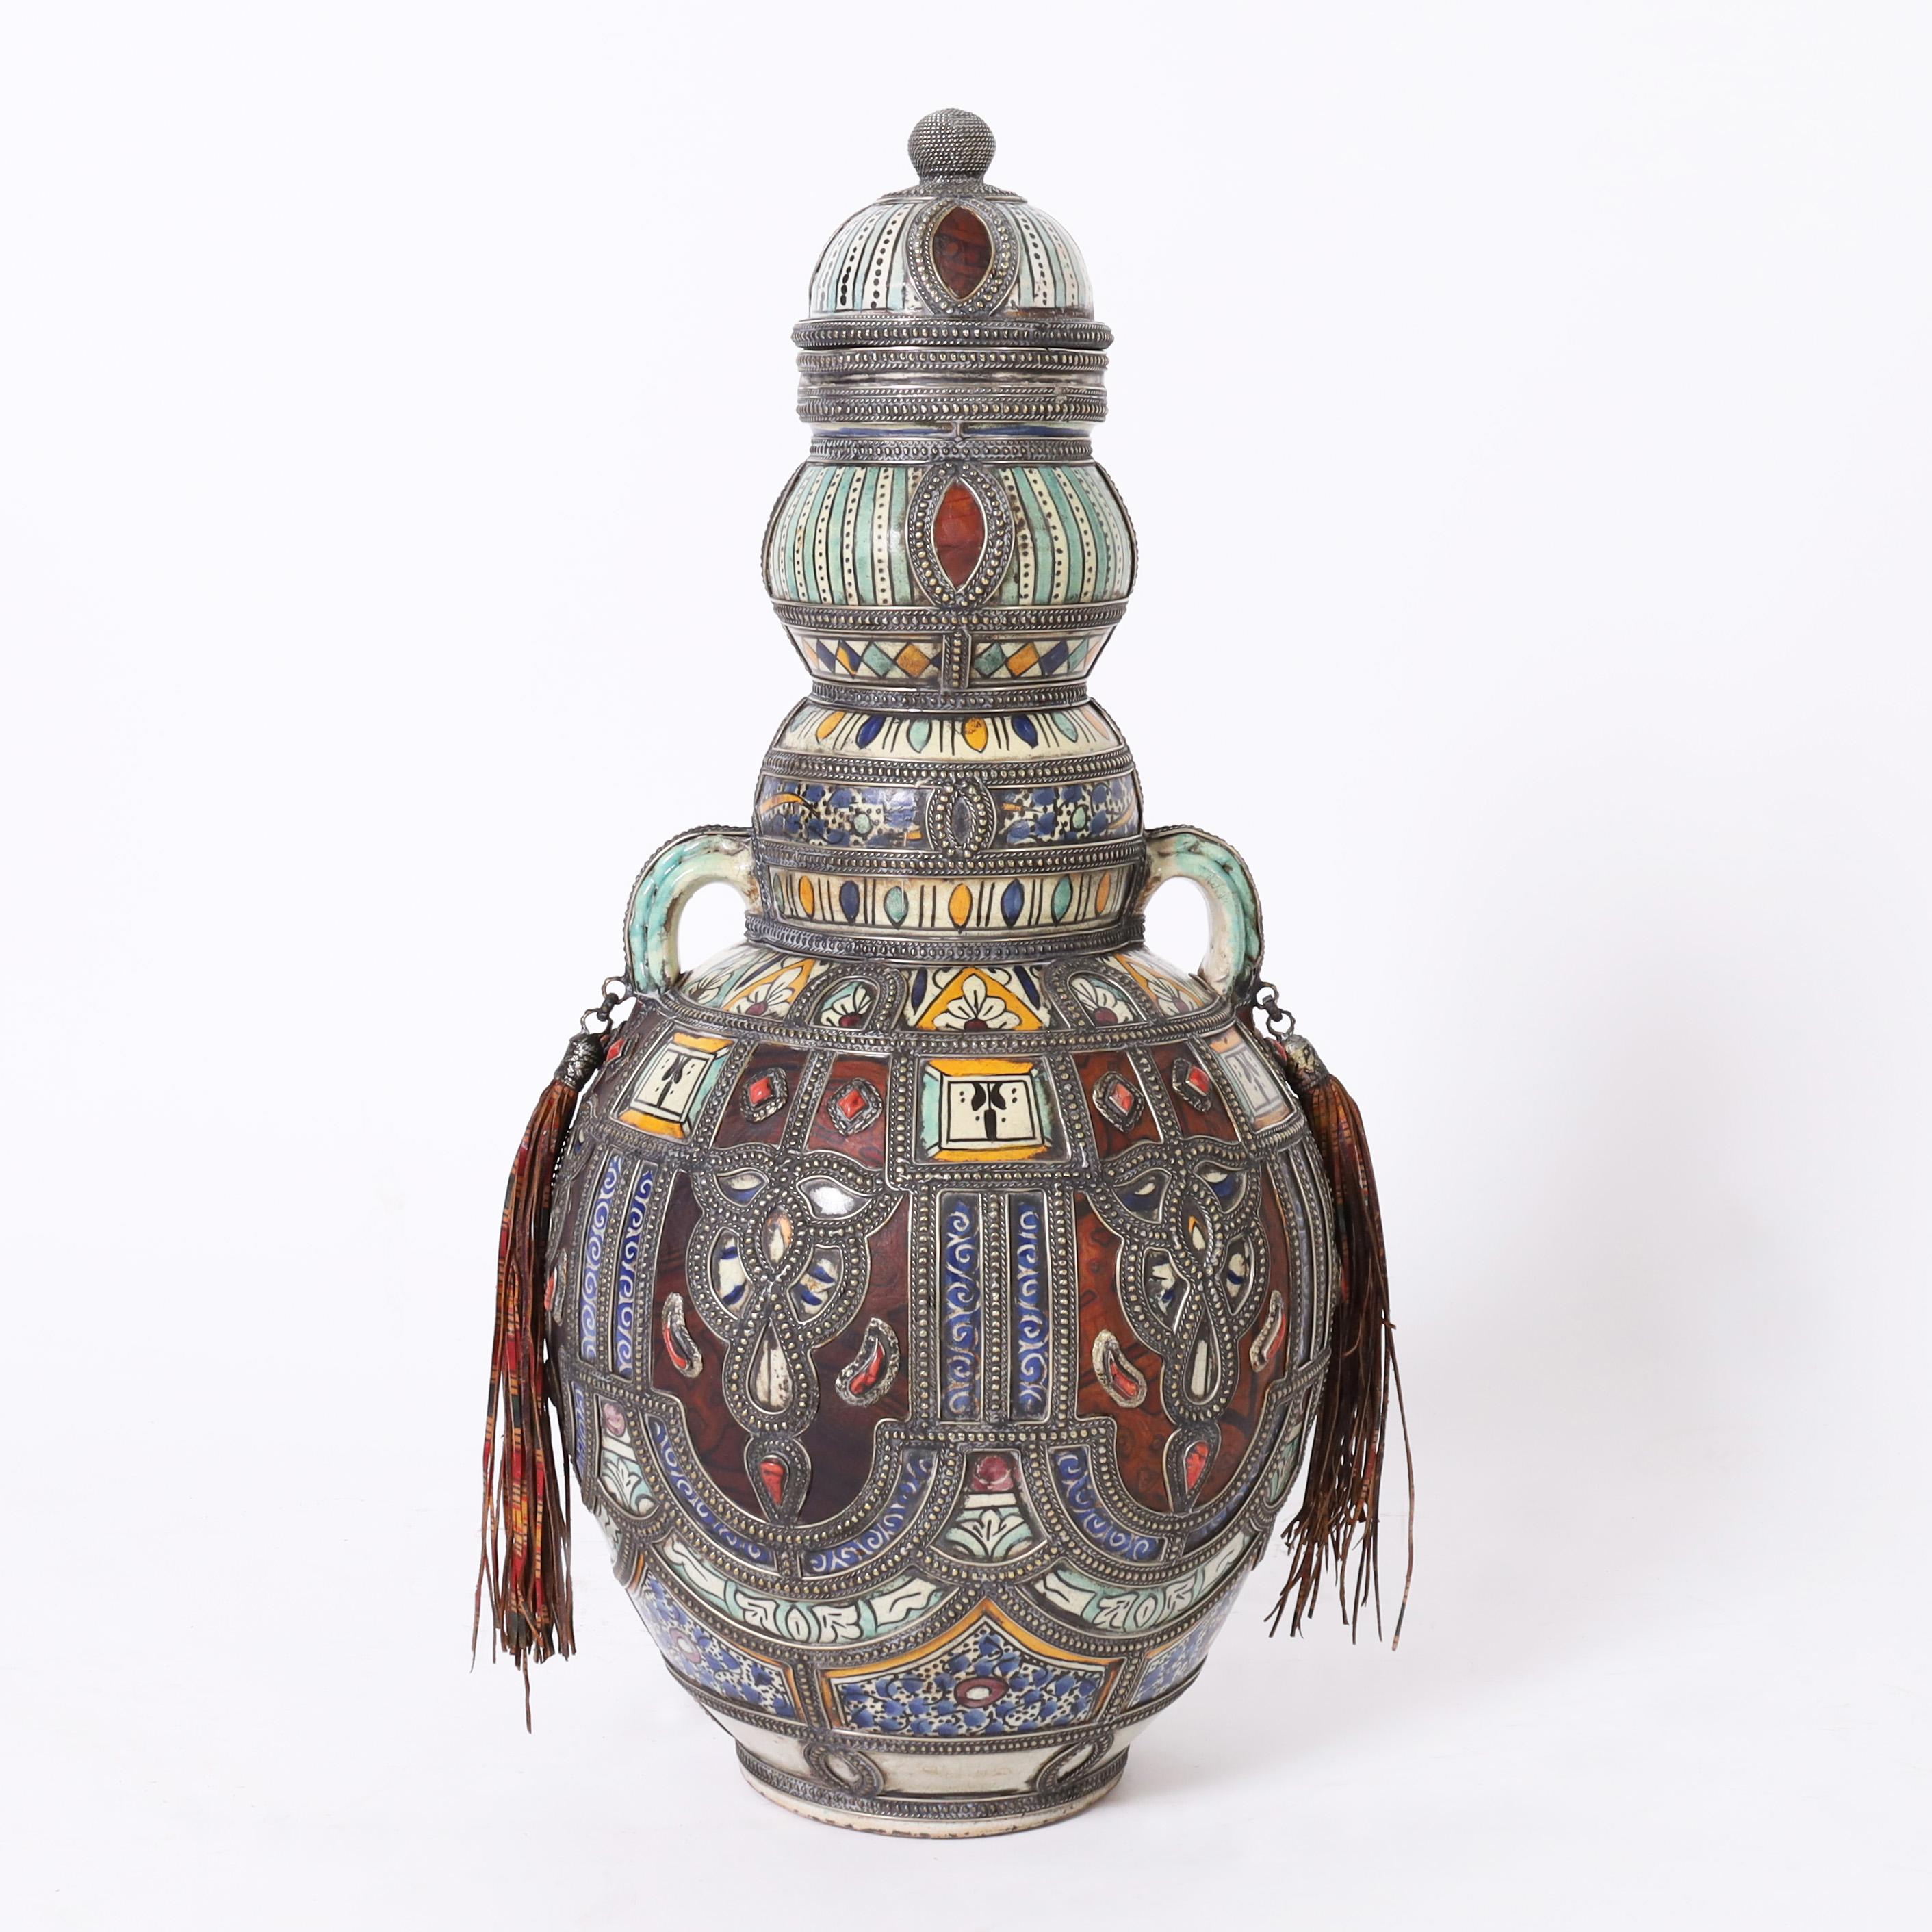 Impressive vintage pair of Moroccan lidded urns handcrafted in terra cotta decorated and glazed in distinctive mediterranean color, featuring jewelry like handcrafted metalwork with semiprecious stones and leather panels and tassels. 